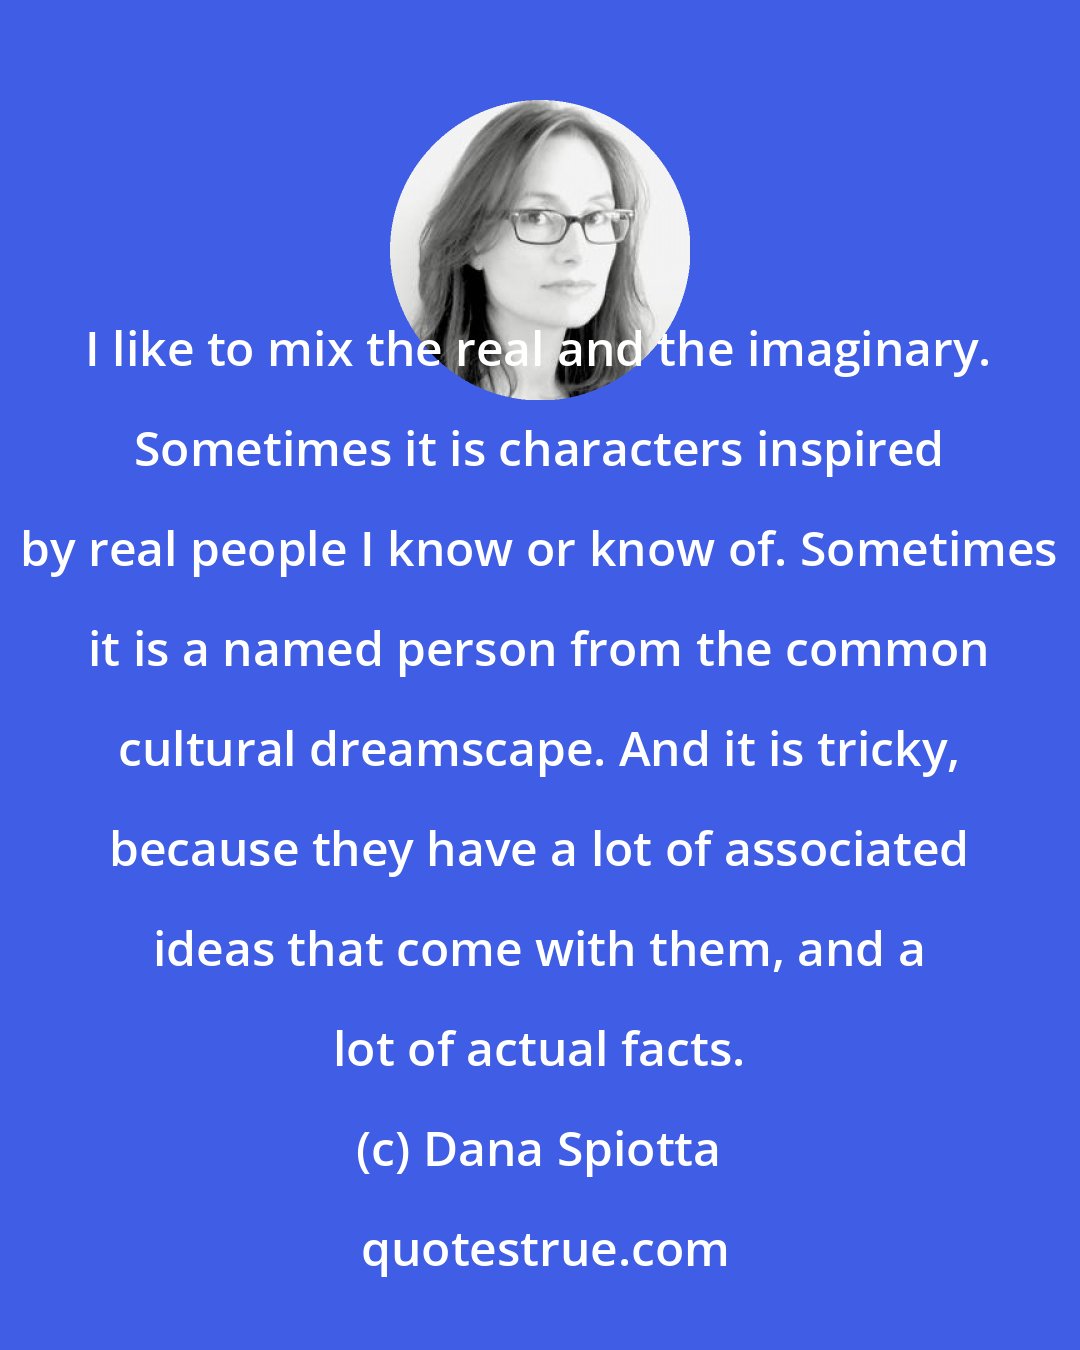 Dana Spiotta: I like to mix the real and the imaginary. Sometimes it is characters inspired by real people I know or know of. Sometimes it is a named person from the common cultural dreamscape. And it is tricky, because they have a lot of associated ideas that come with them, and a lot of actual facts.